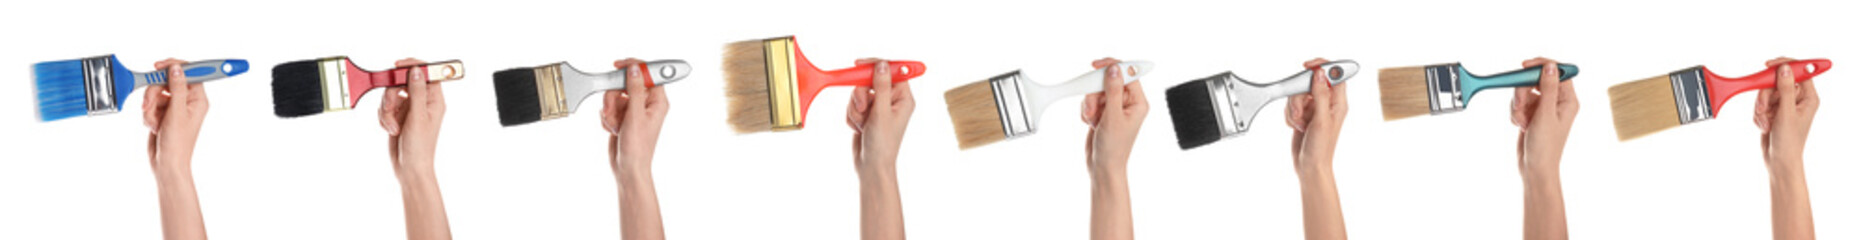 Set of women holding different clean paint brushes on white background, closeup